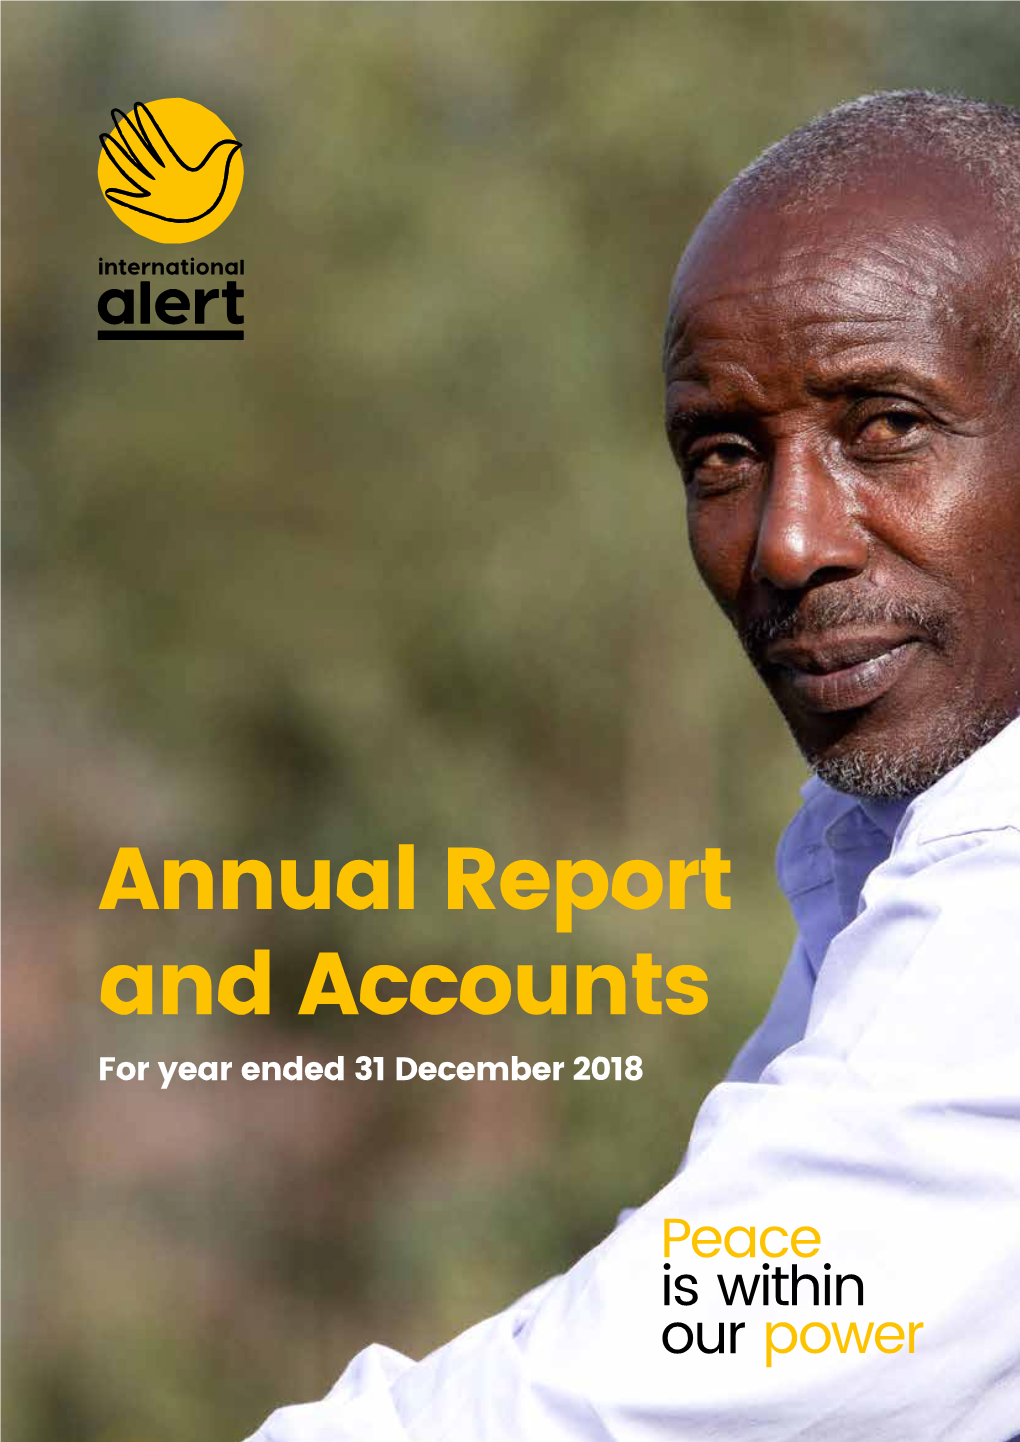 Annual Report and Accounts for Year Ended 31 December 2018 About International Alert